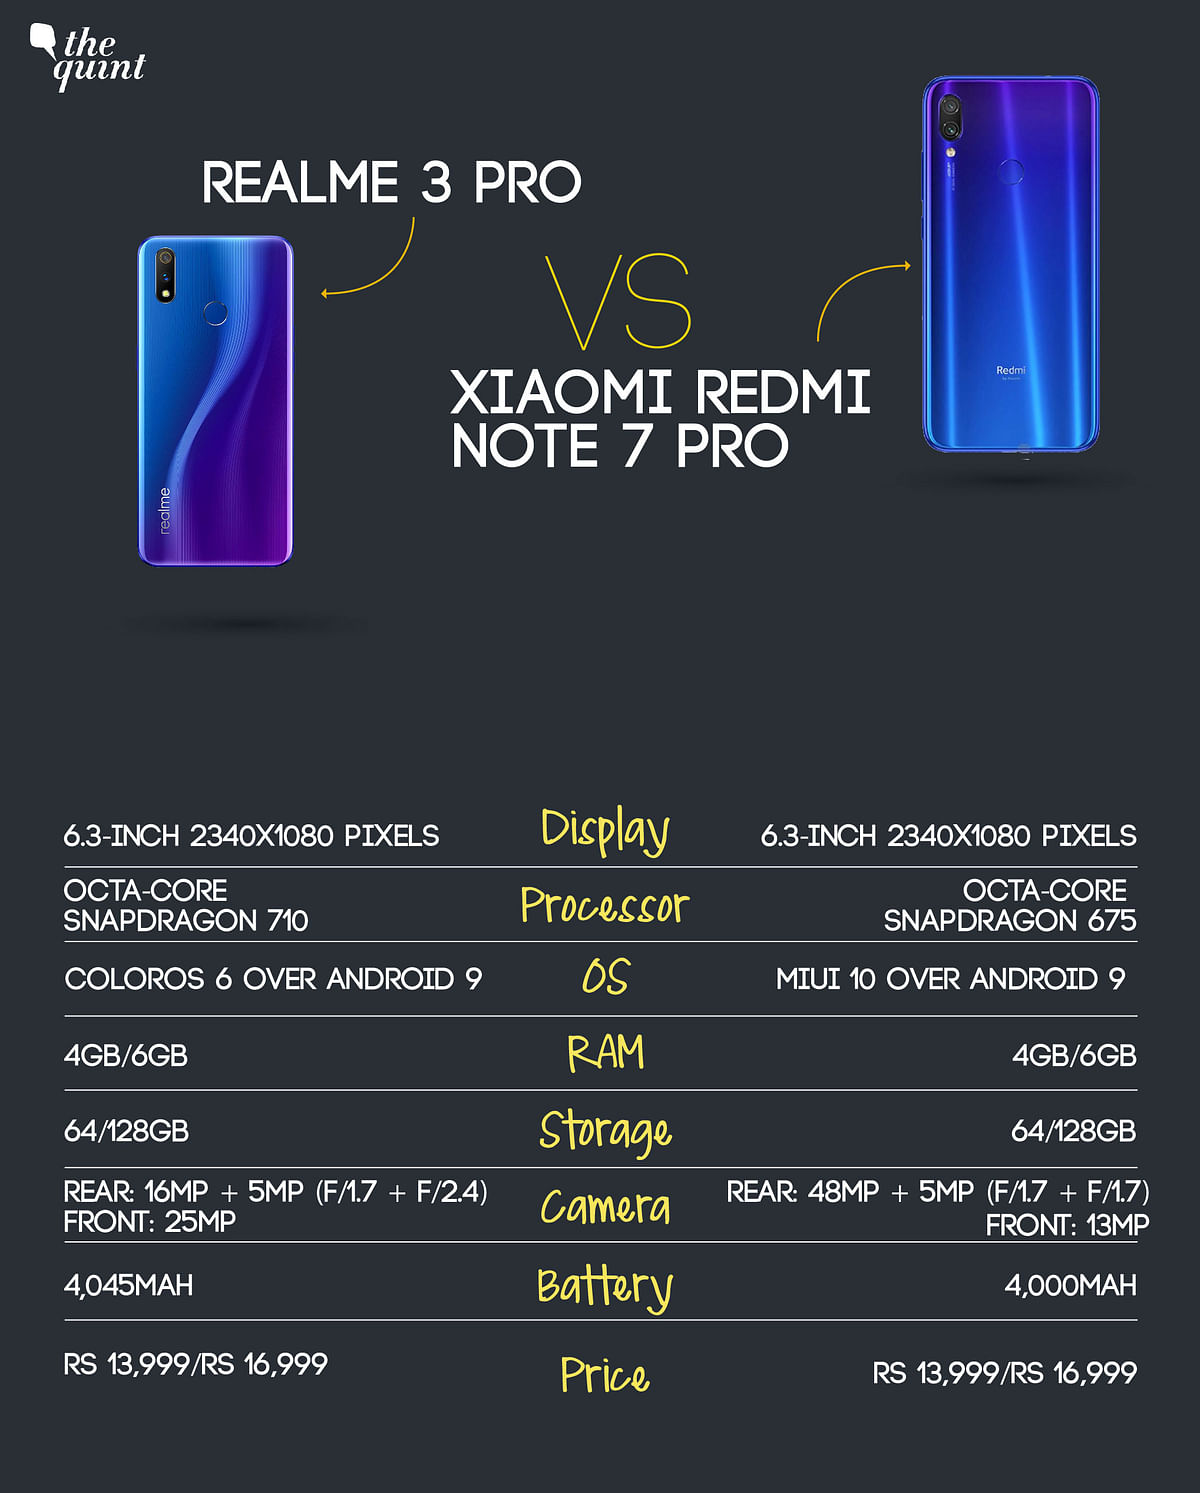 Both these phones from Xiaomi and Realme pack decent features and don’t cost a lot as well.